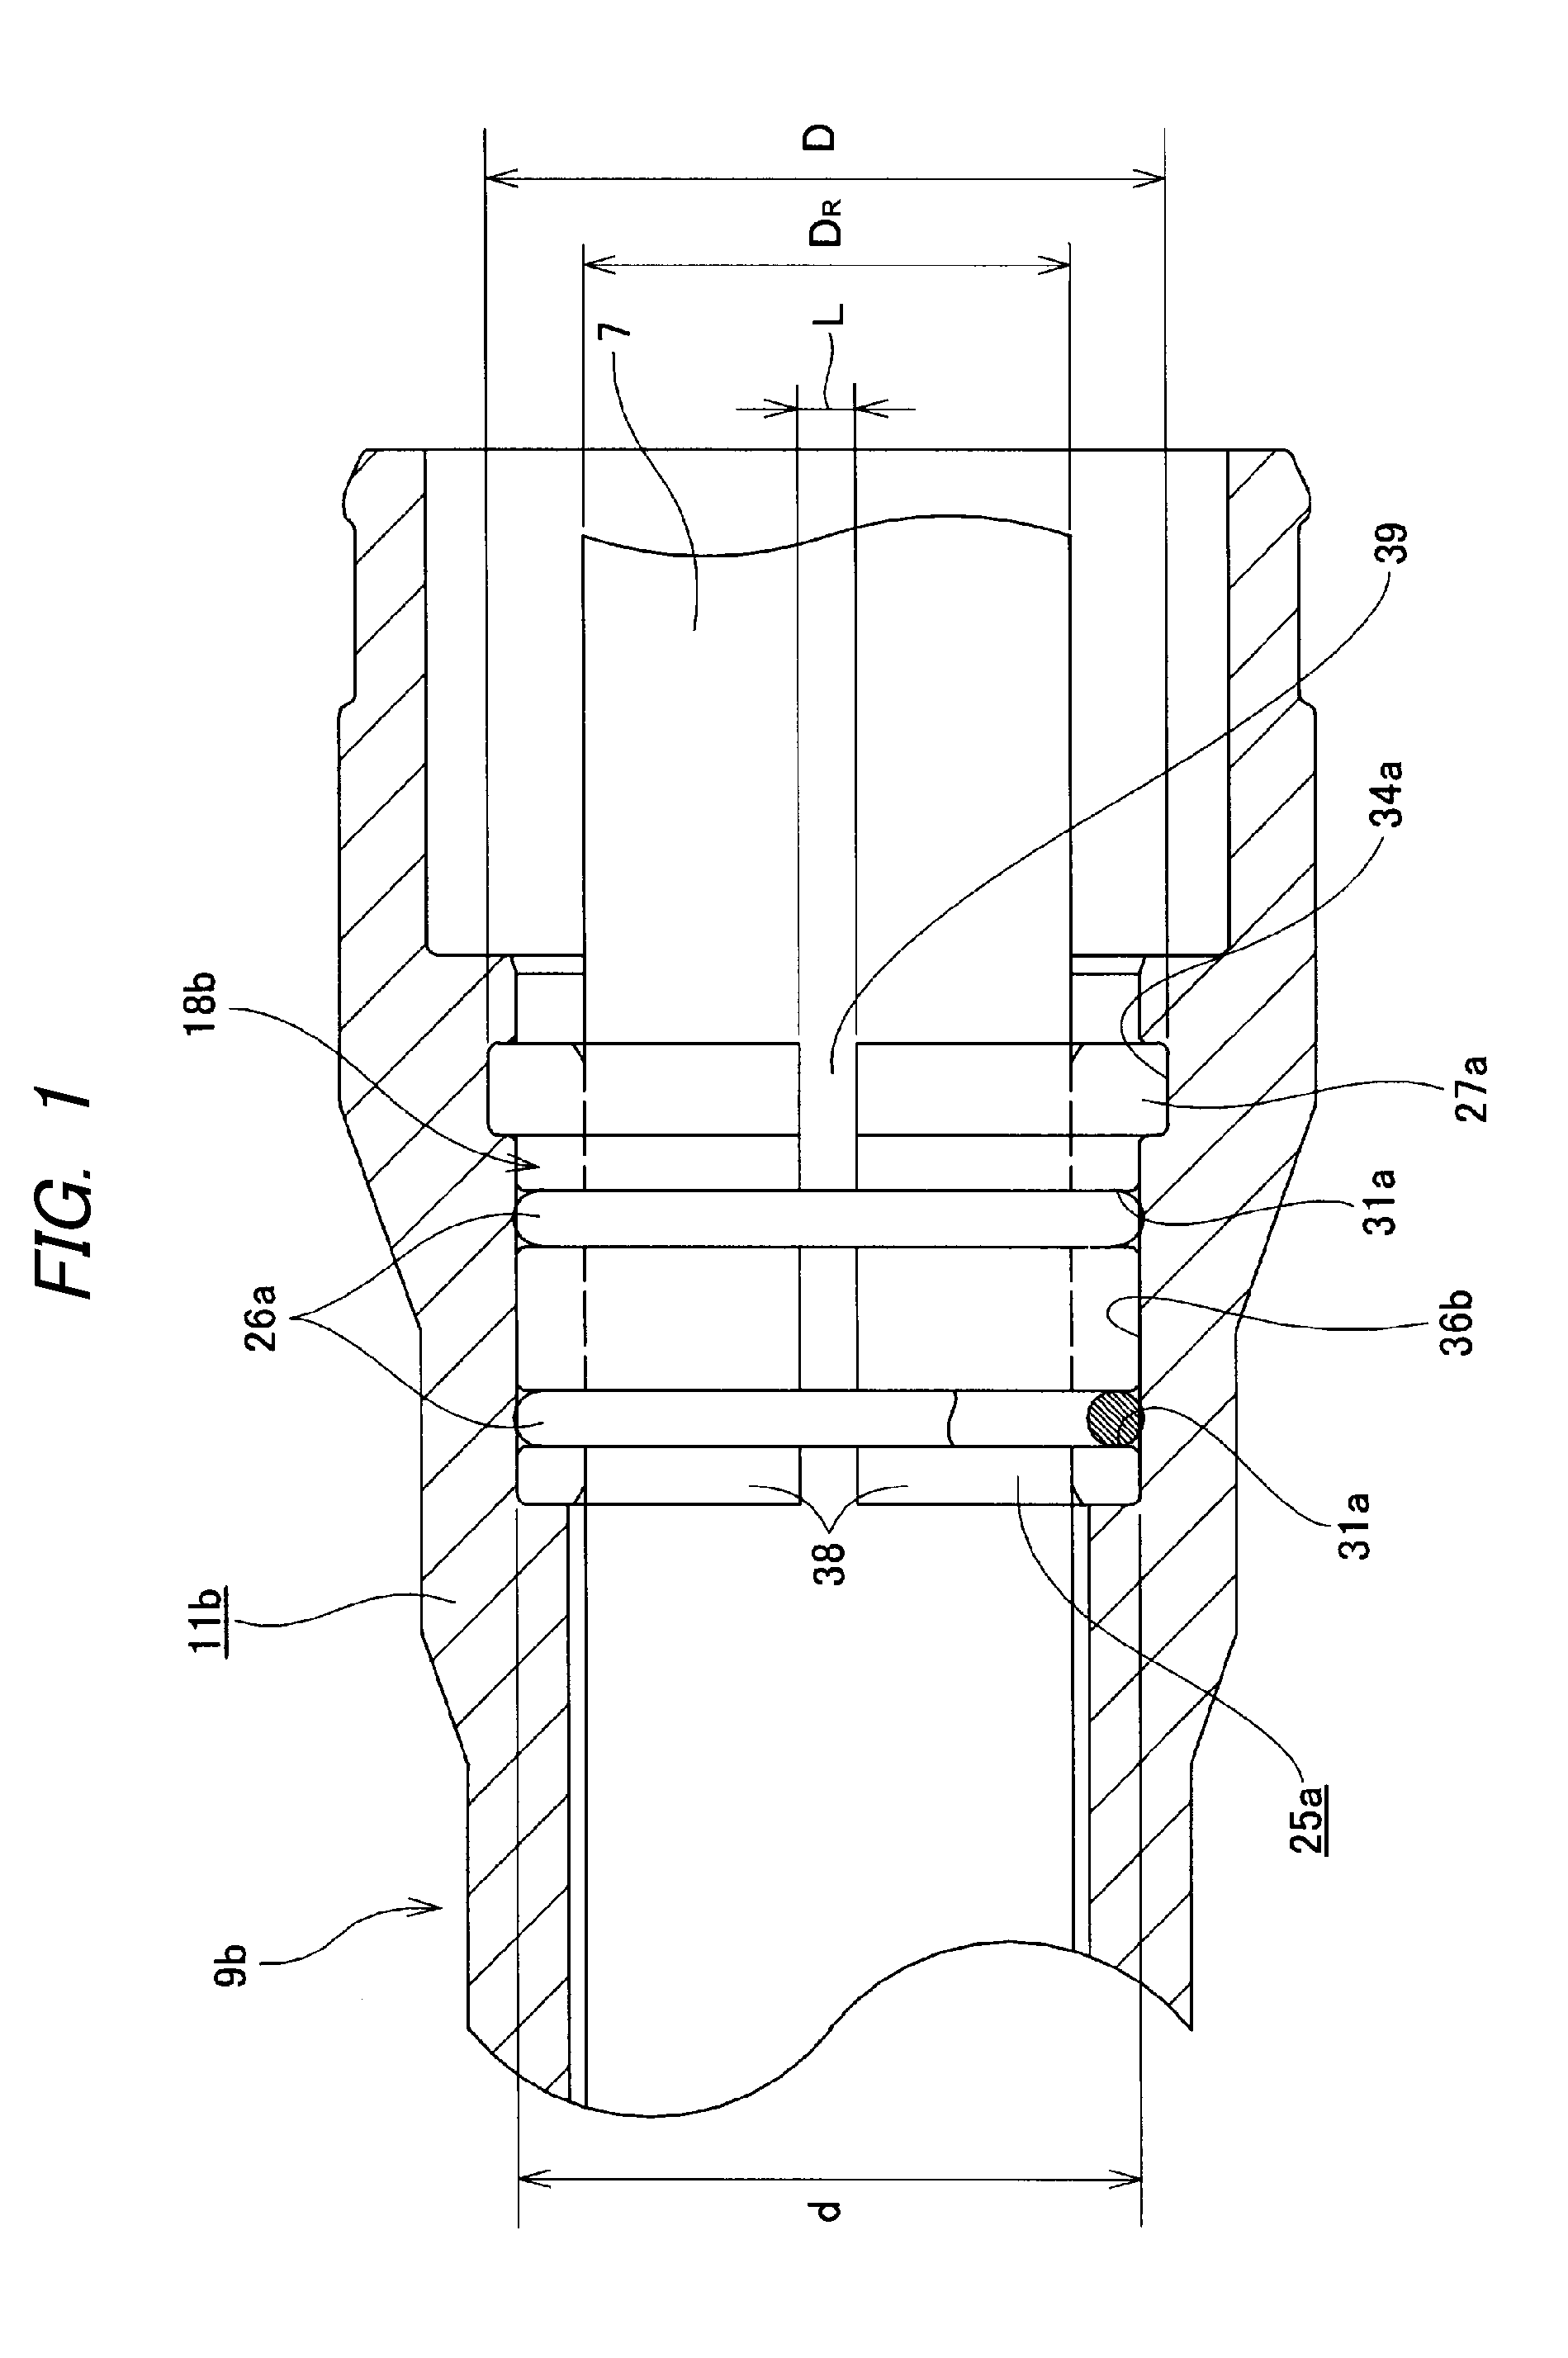 Guide bush and rack-and-pinion steering gear unit